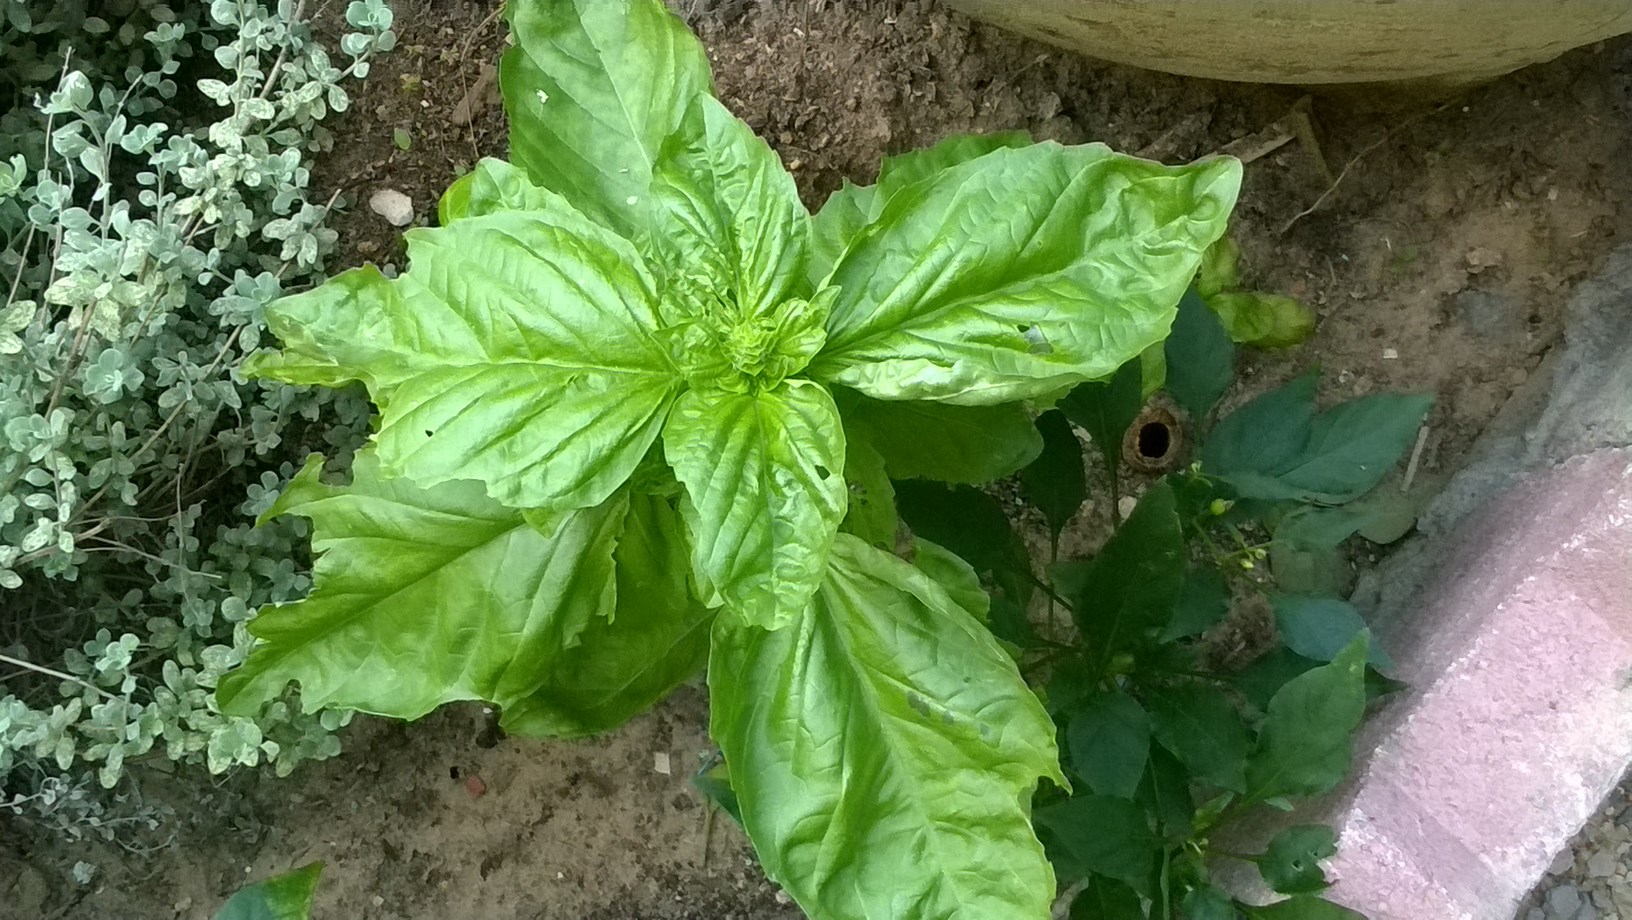 Basil plants are one of the most popular herbs to grow and also one of the easiest. Basil (Ocimum basilicum) is a member of the mint family.